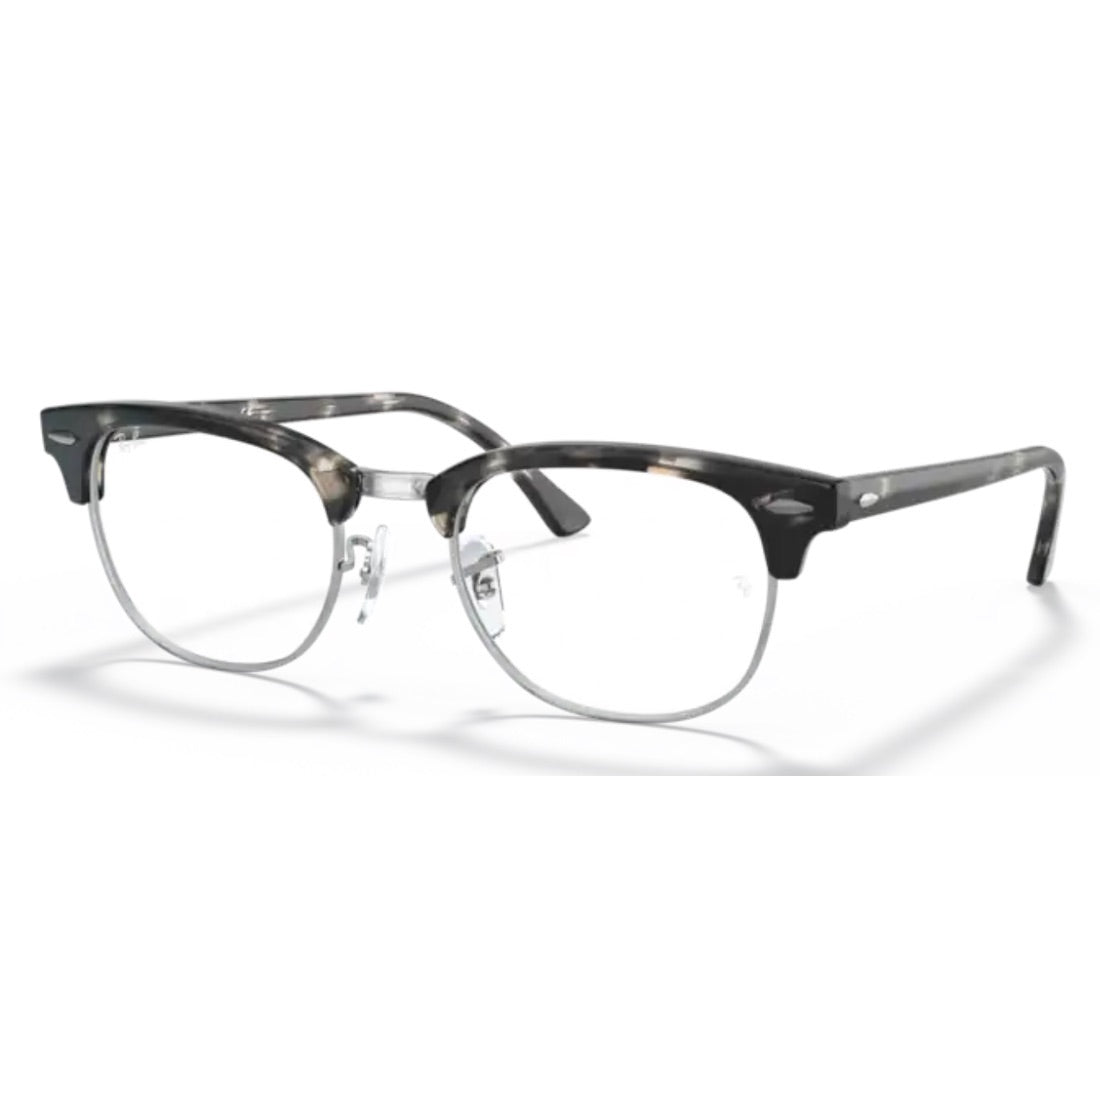 RAY-BAN - RX5154 8117 - Clubmaster - PARIS LUNETIER